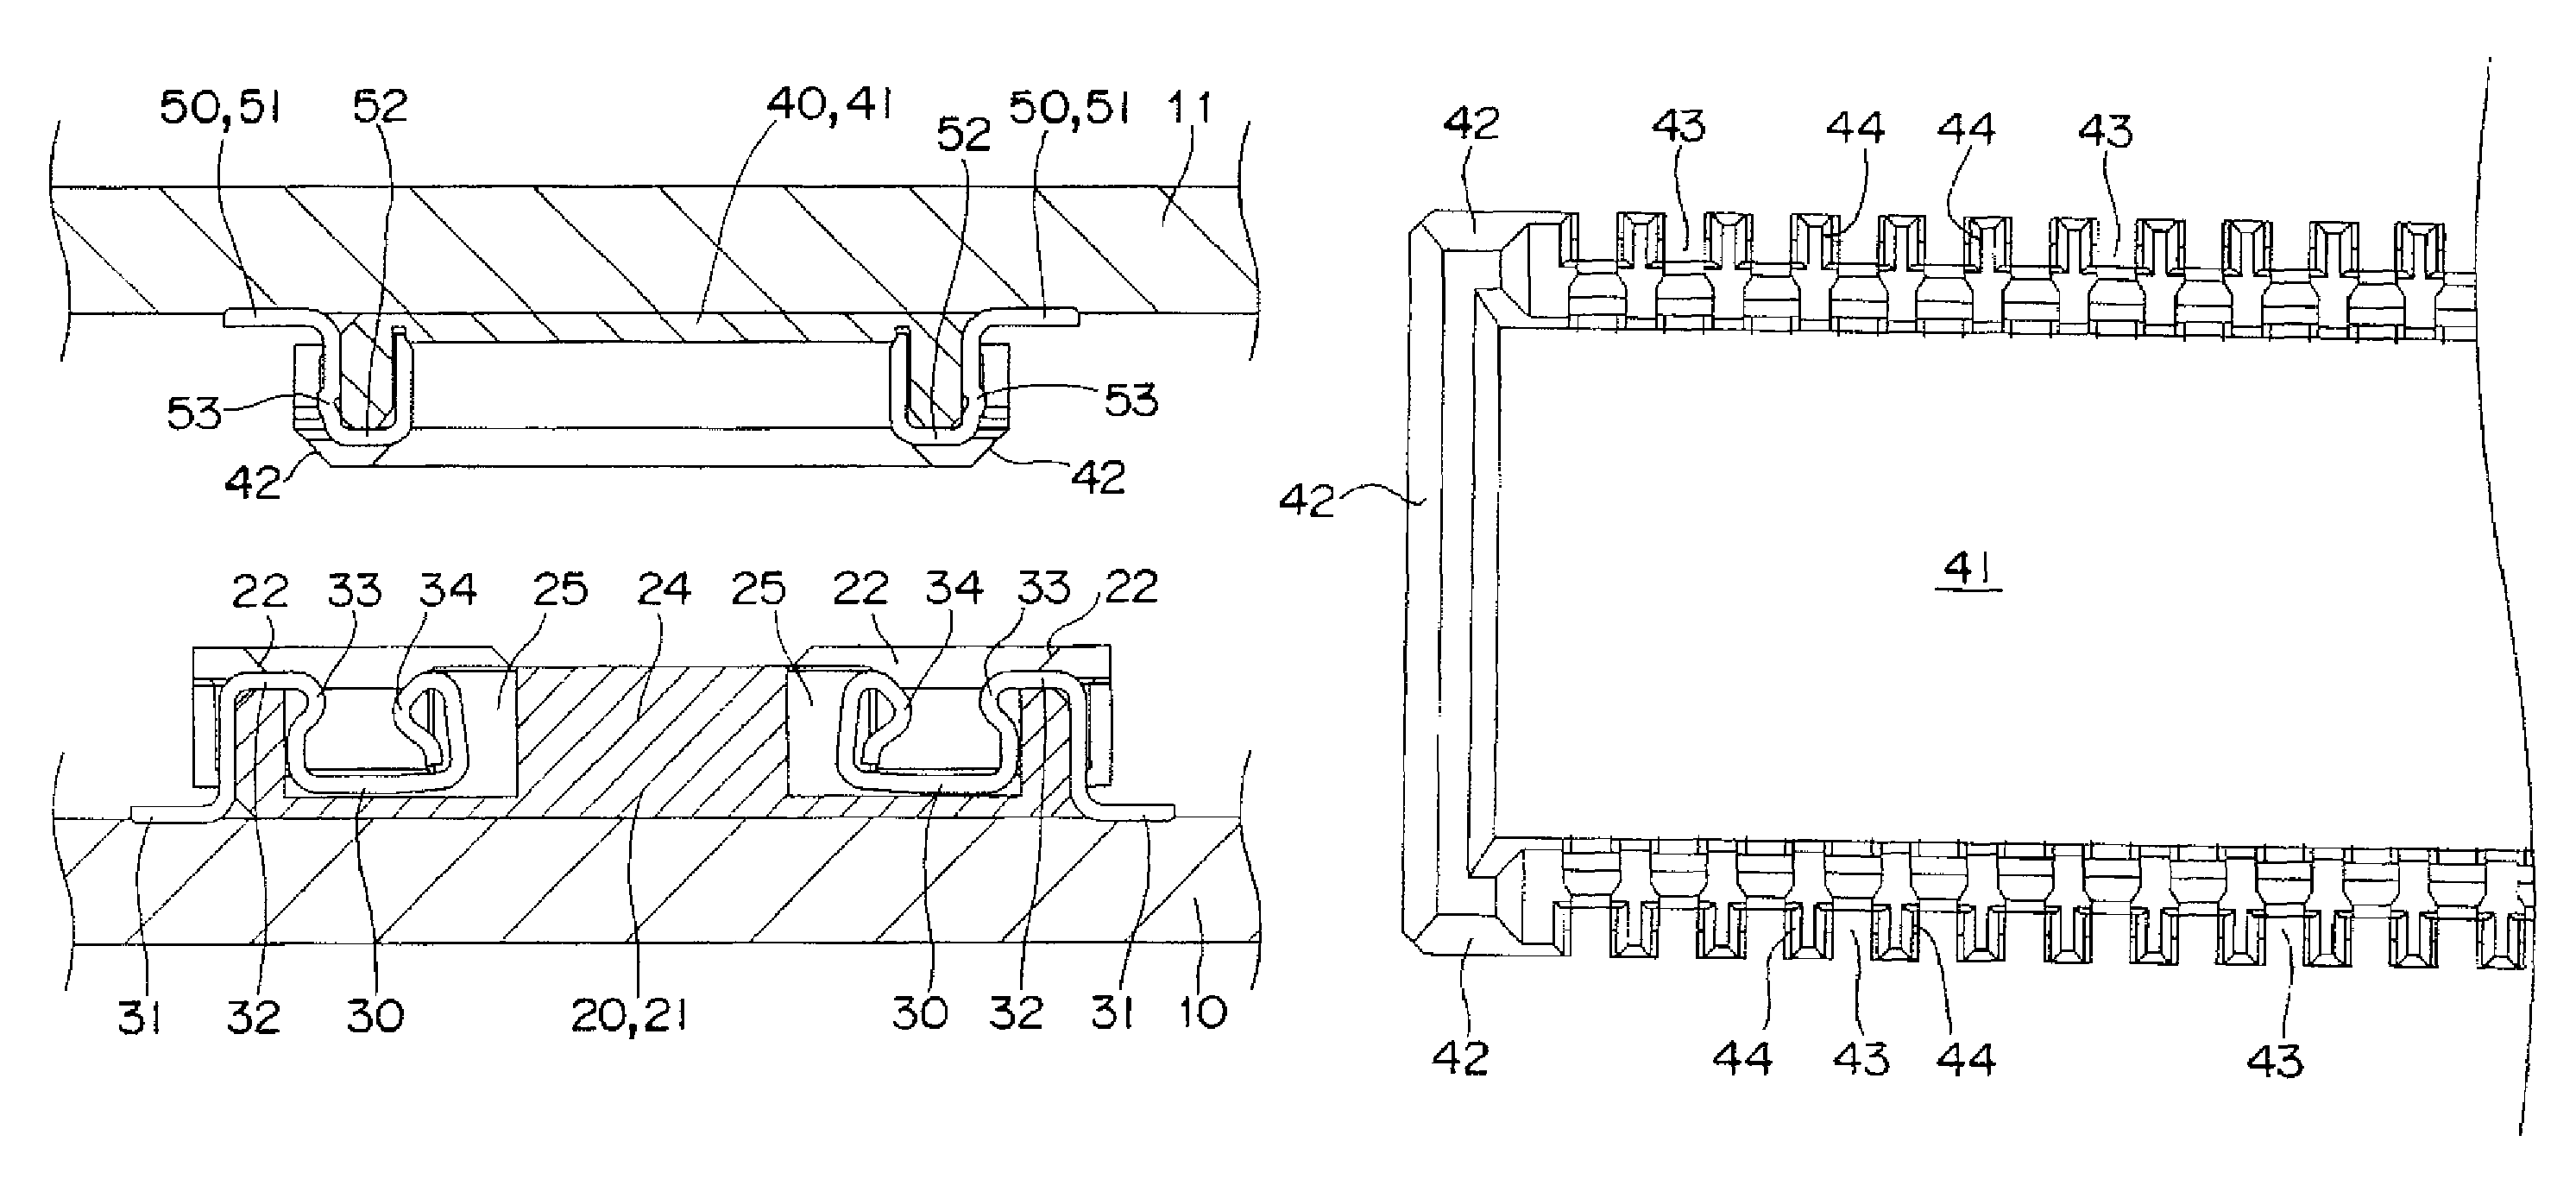 Connector for connecting printed boards having a plug having press-in grooves fitted into a socket